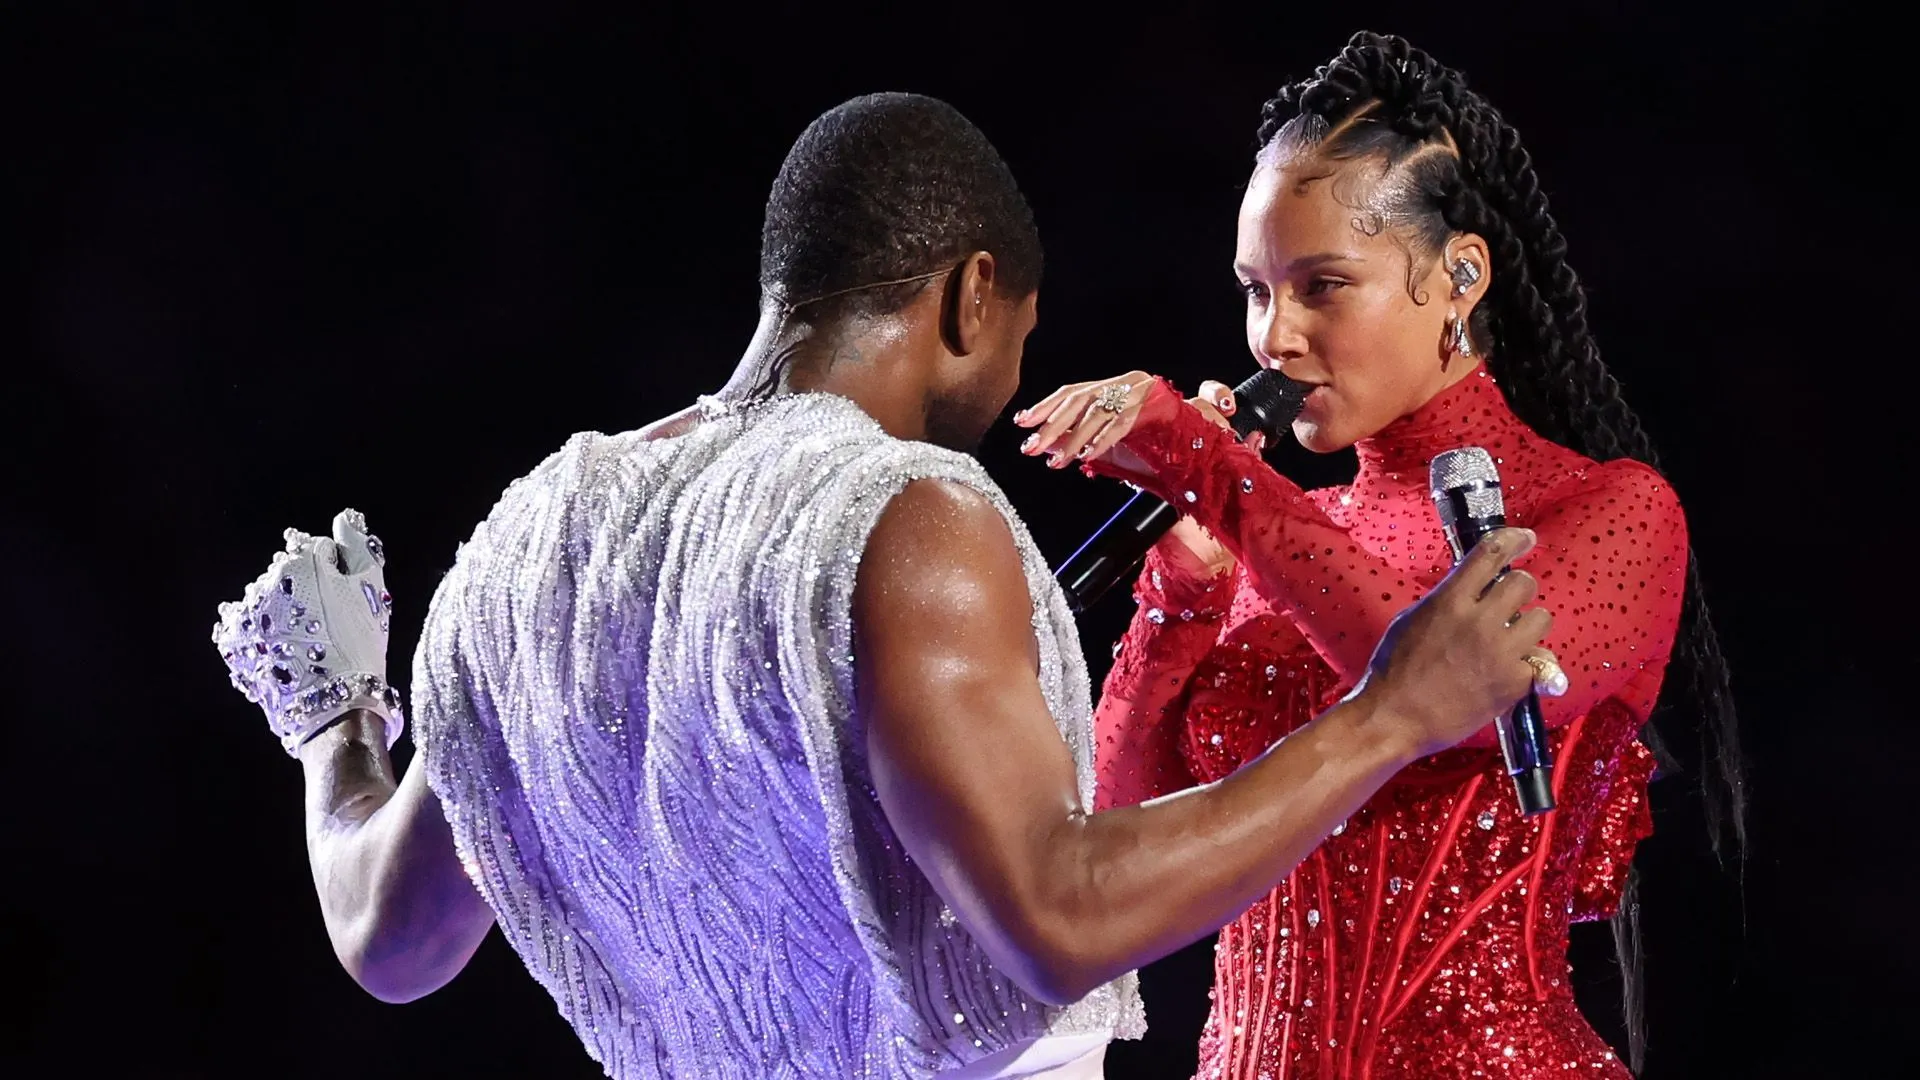 Super Bowl: Strong accusations against Alicia Keys